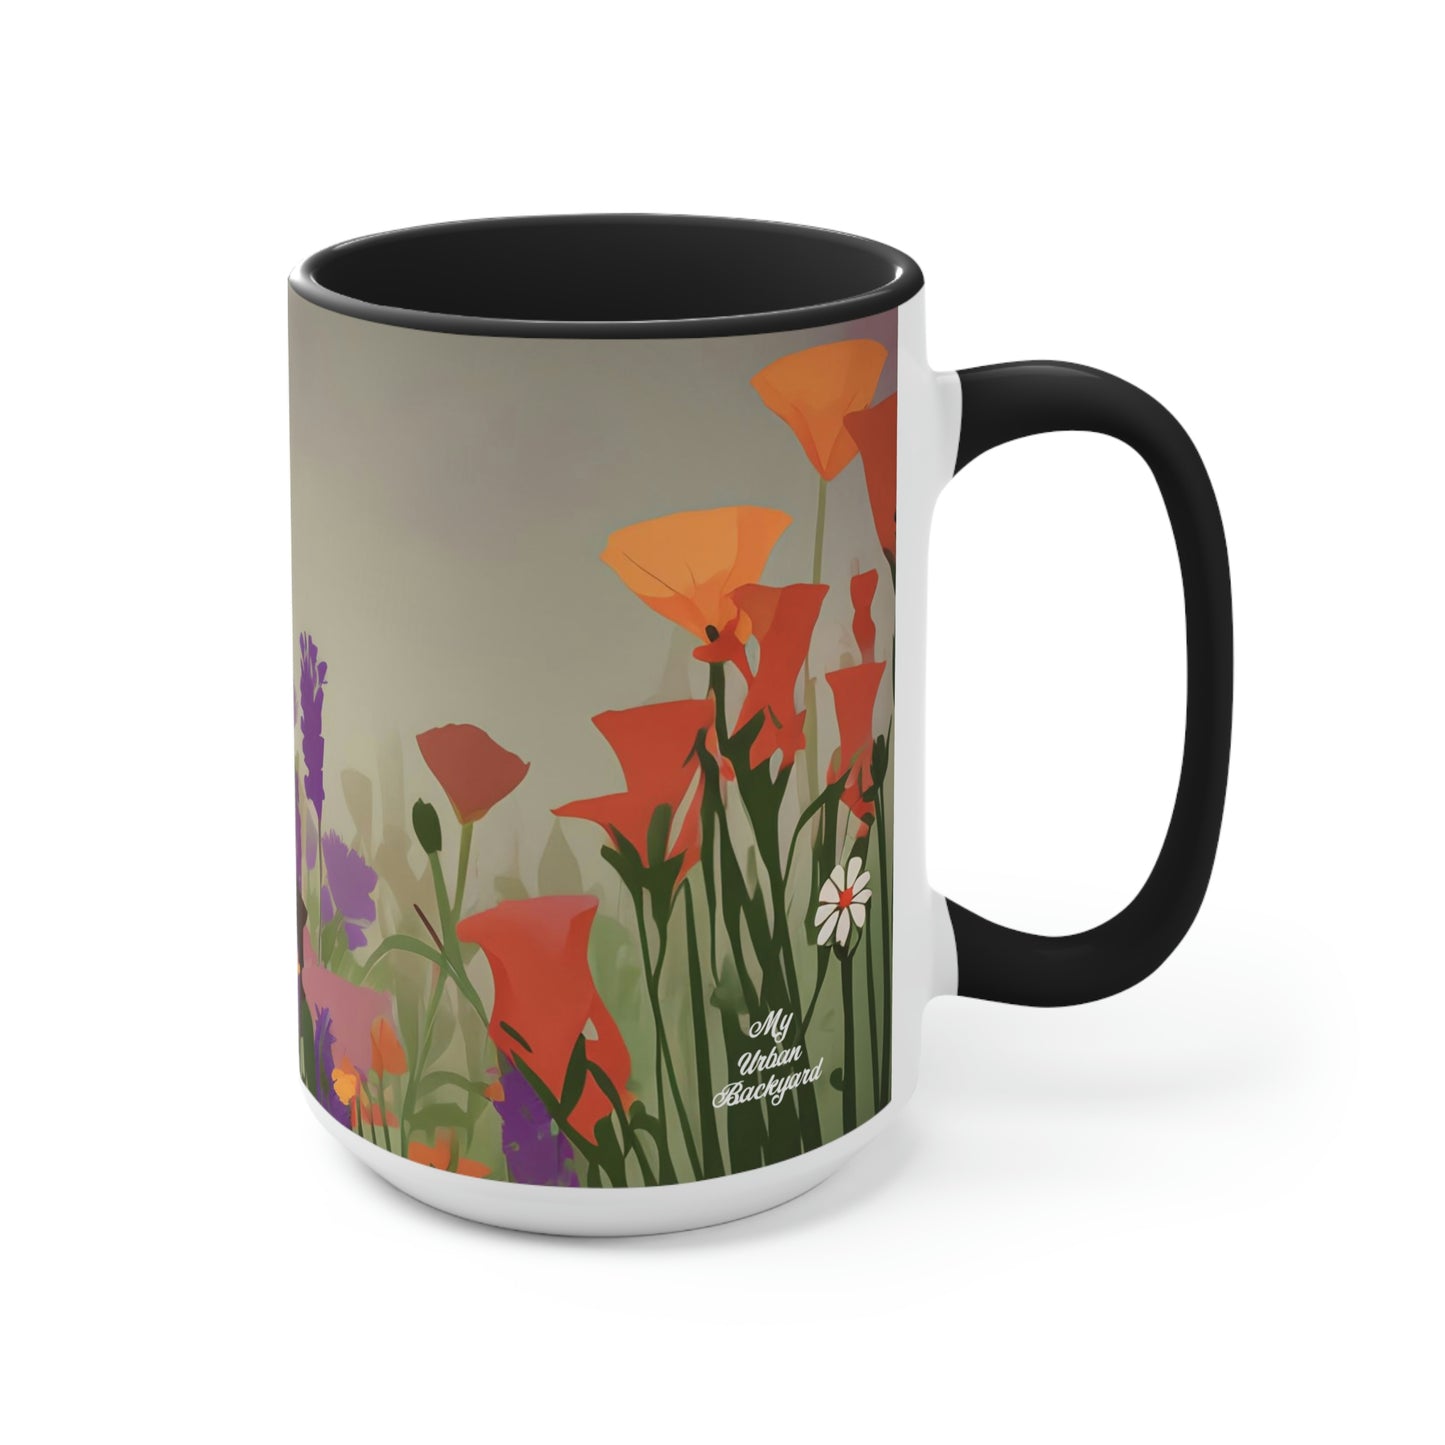 Cat with Wildflowers, Ceramic Mug - Perfect for Coffee, Tea, and More!